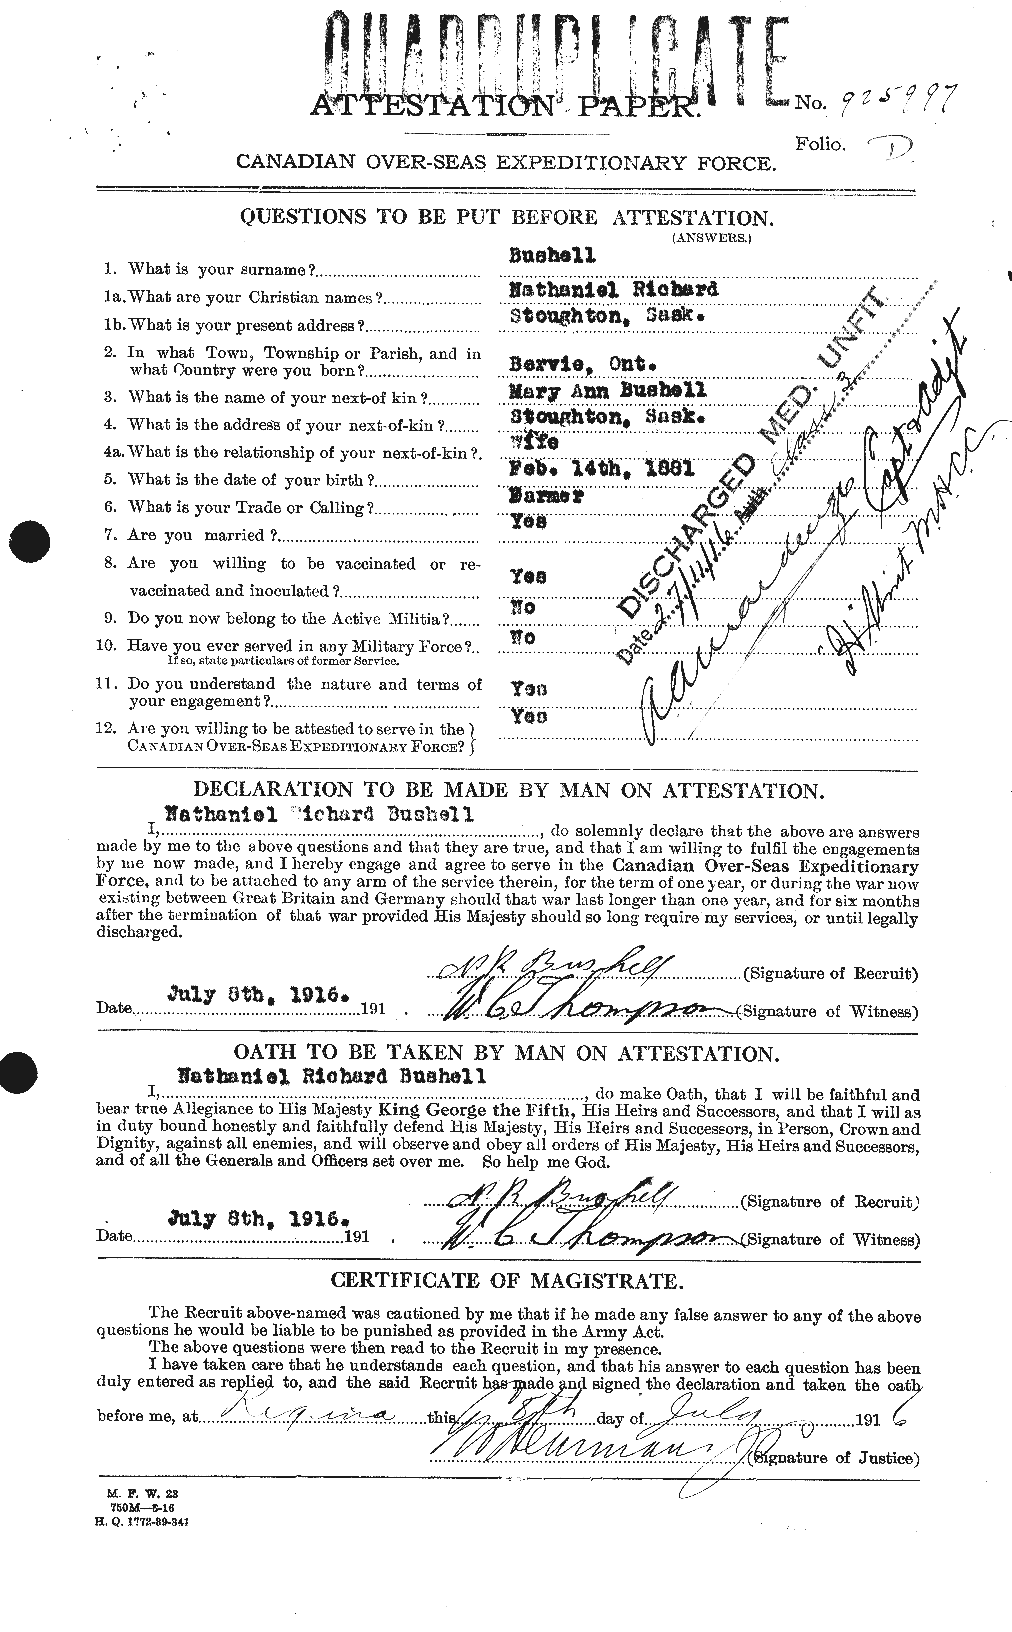 Personnel Records of the First World War - CEF 274480a